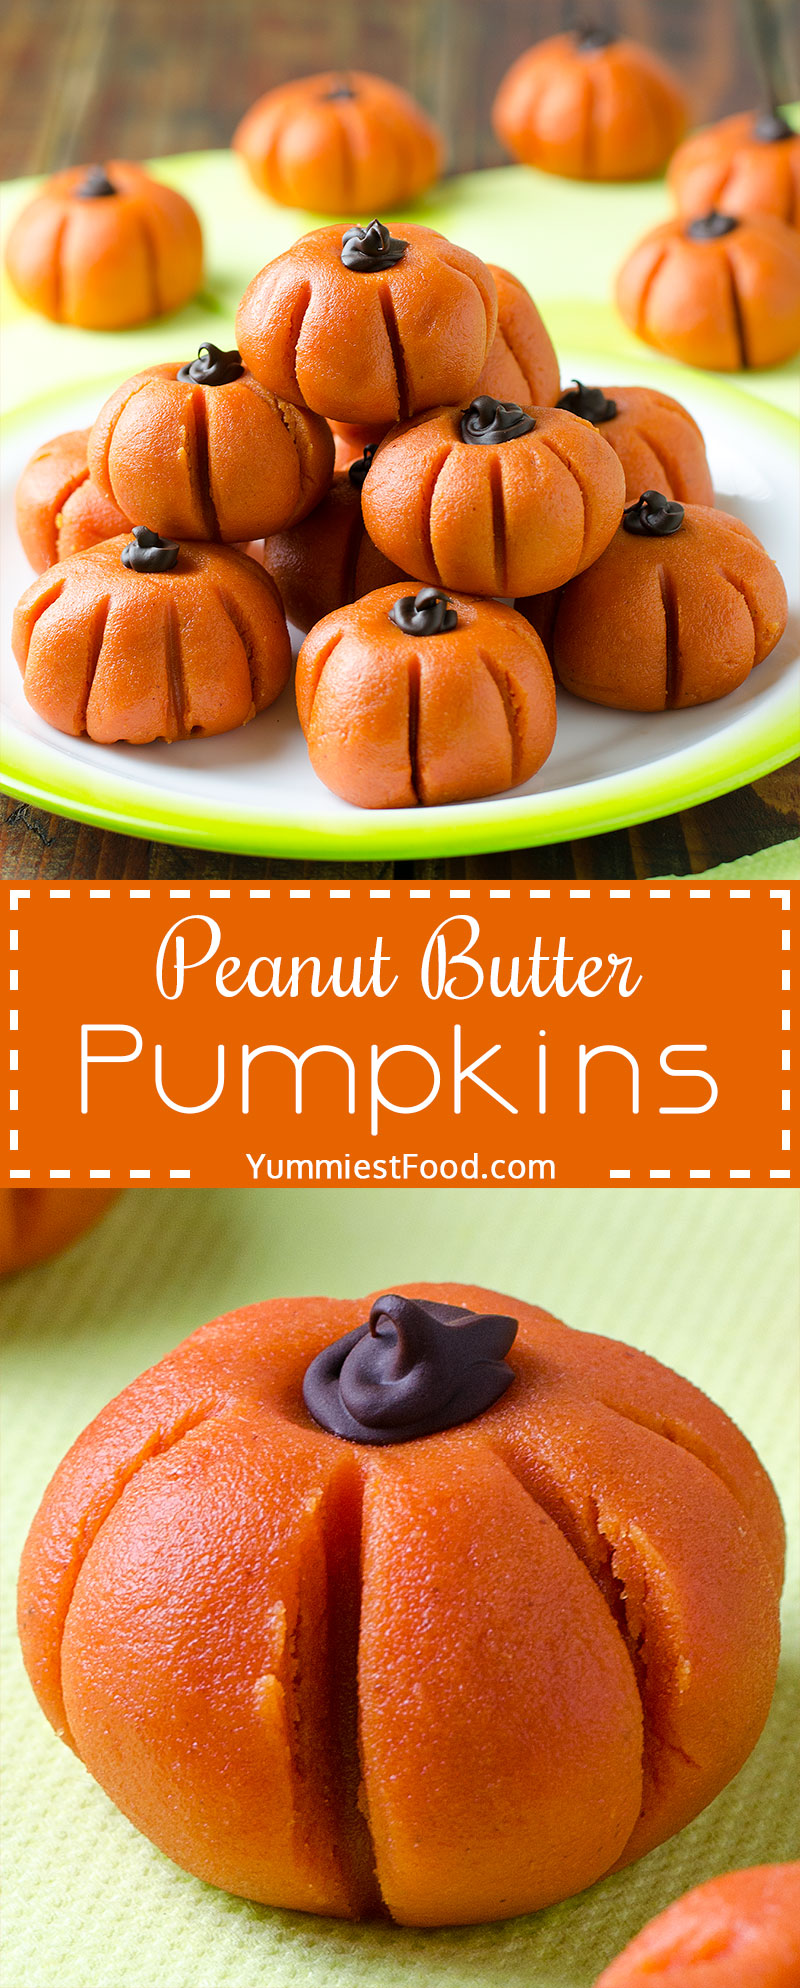 EASY PEANUT BUTTER PUMPKINS NO-BAKE - This simple and easy Peanut Butter Pumpkins are fun Halloween party snack or even Thanksgiving, that are perfect for any party and kids and whole family will love